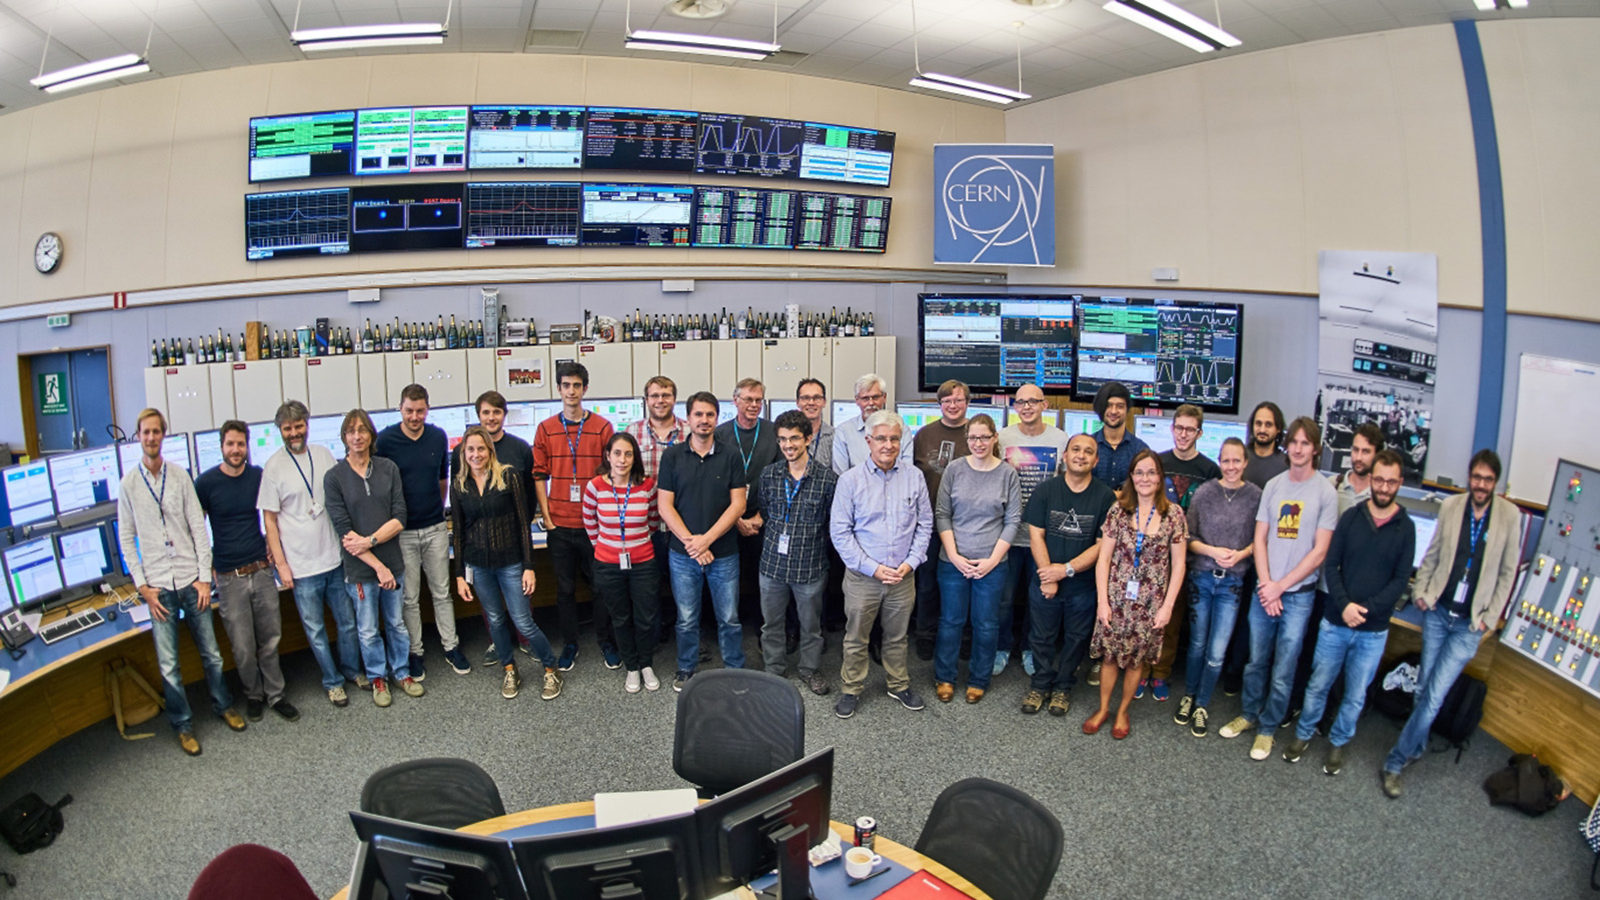 Group photo of about 30 people in the CERN Control Centre